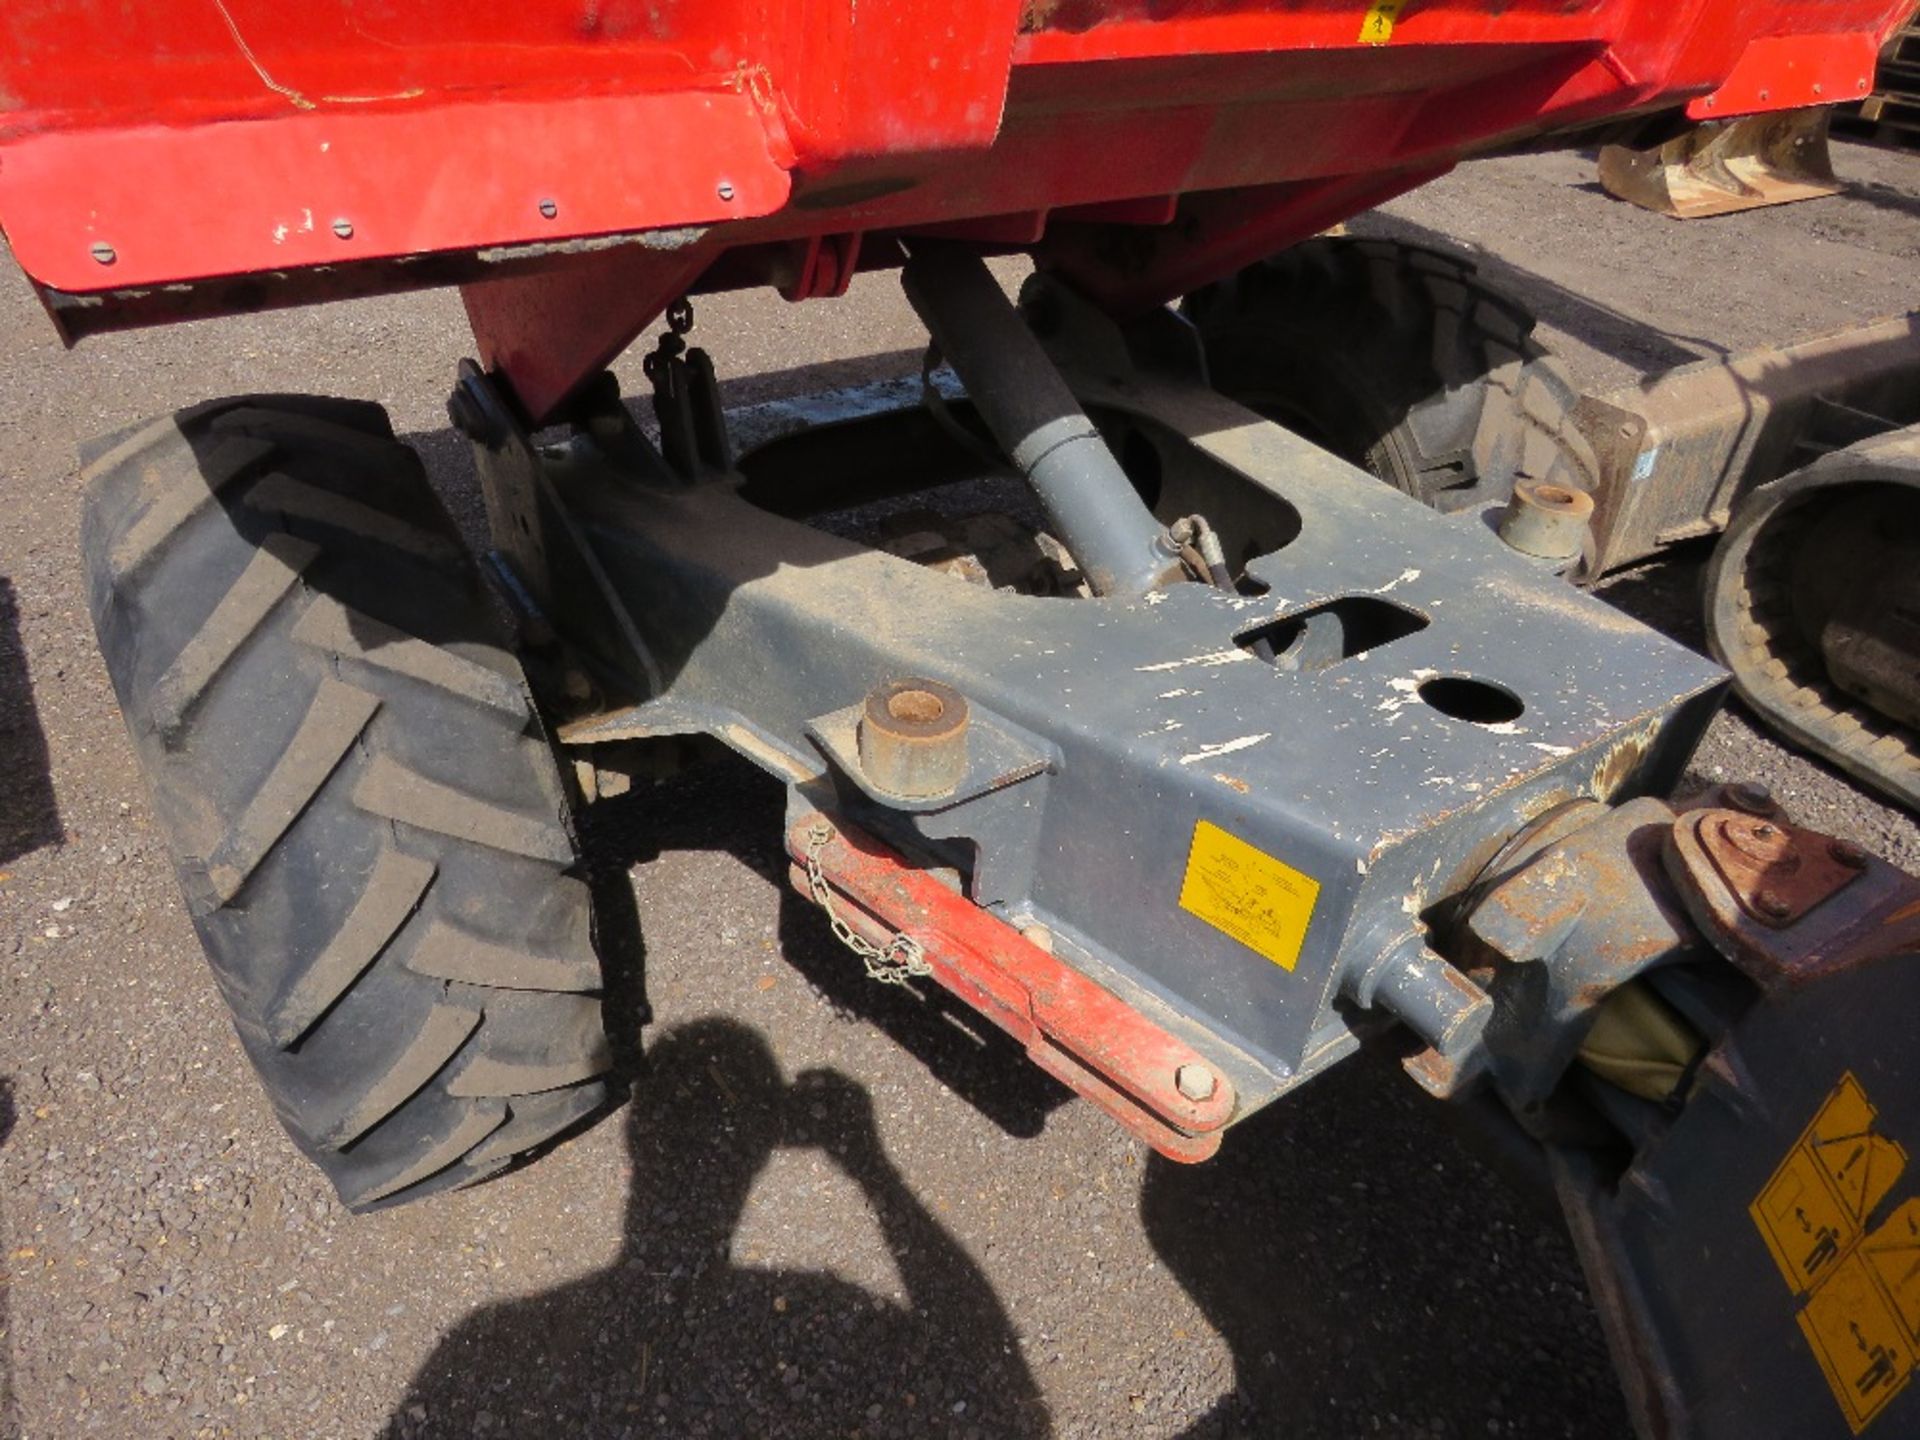 NEUSON 3001 3 TONNE STRAIGHT TIP DUMPER 3099 REC HOURS. WHEN TESTED WAS SEEN TO DRIVE, TIP AND BRAK - Image 10 of 11